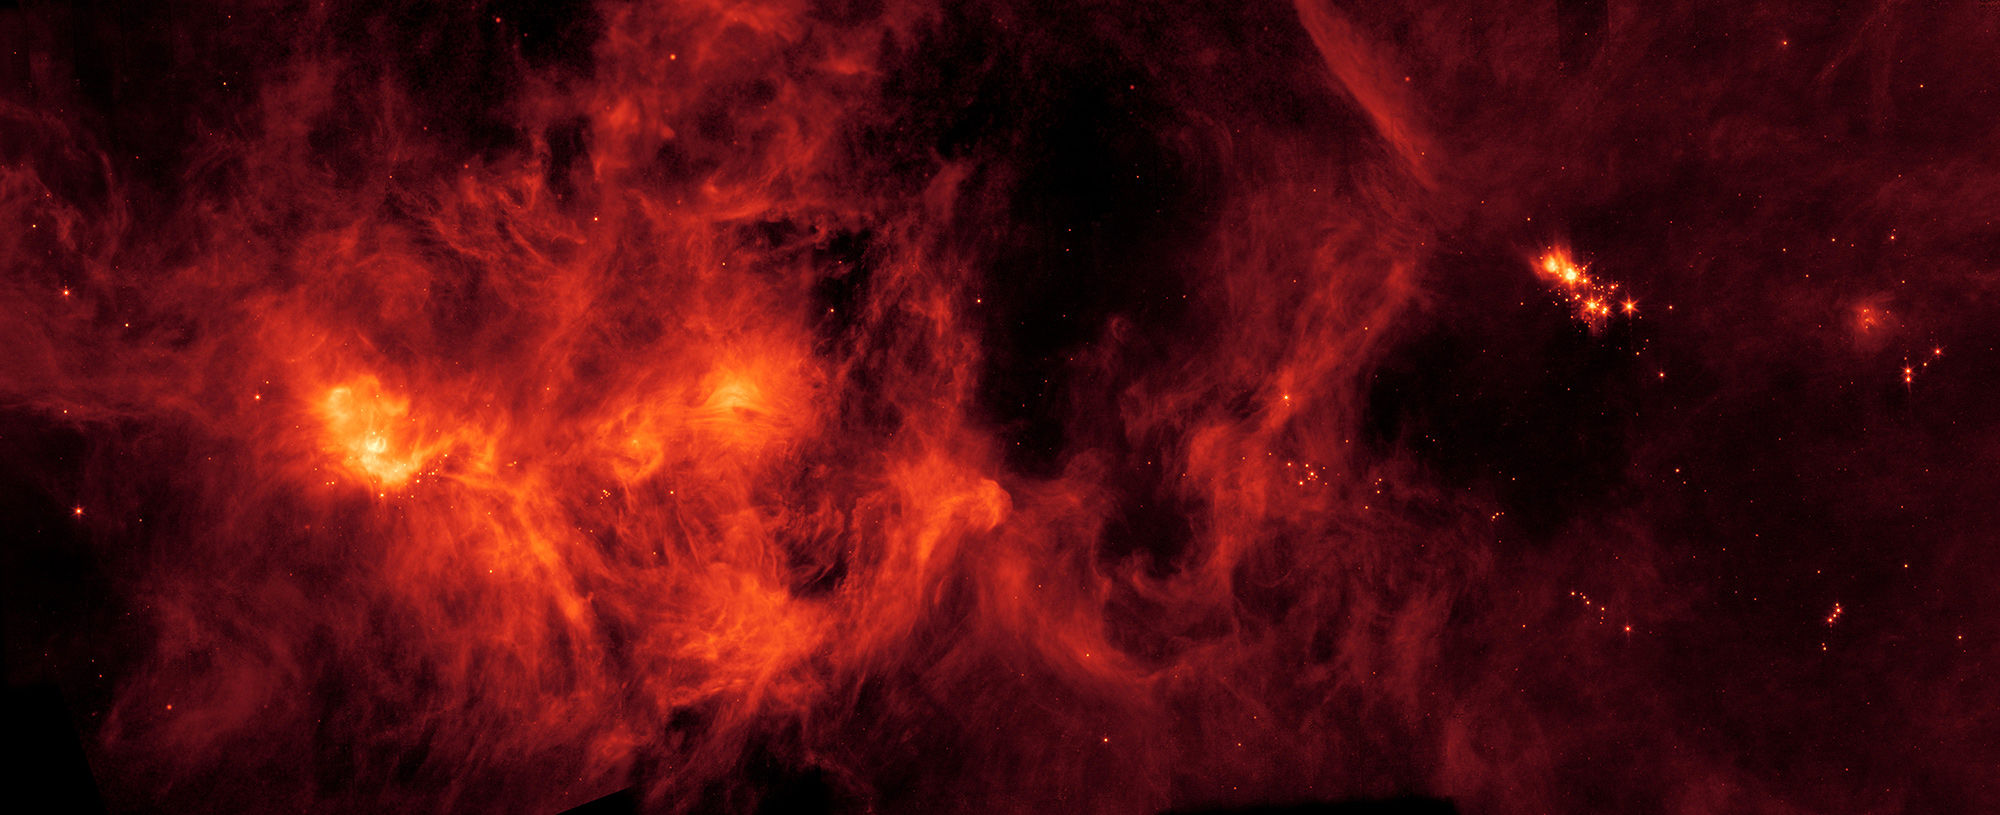 Spitzer Space Telescope image of a part of the enormous Perseus Molecular Cloud, a nearby star-forming factory. Credit: NASA/JPL-Caltech